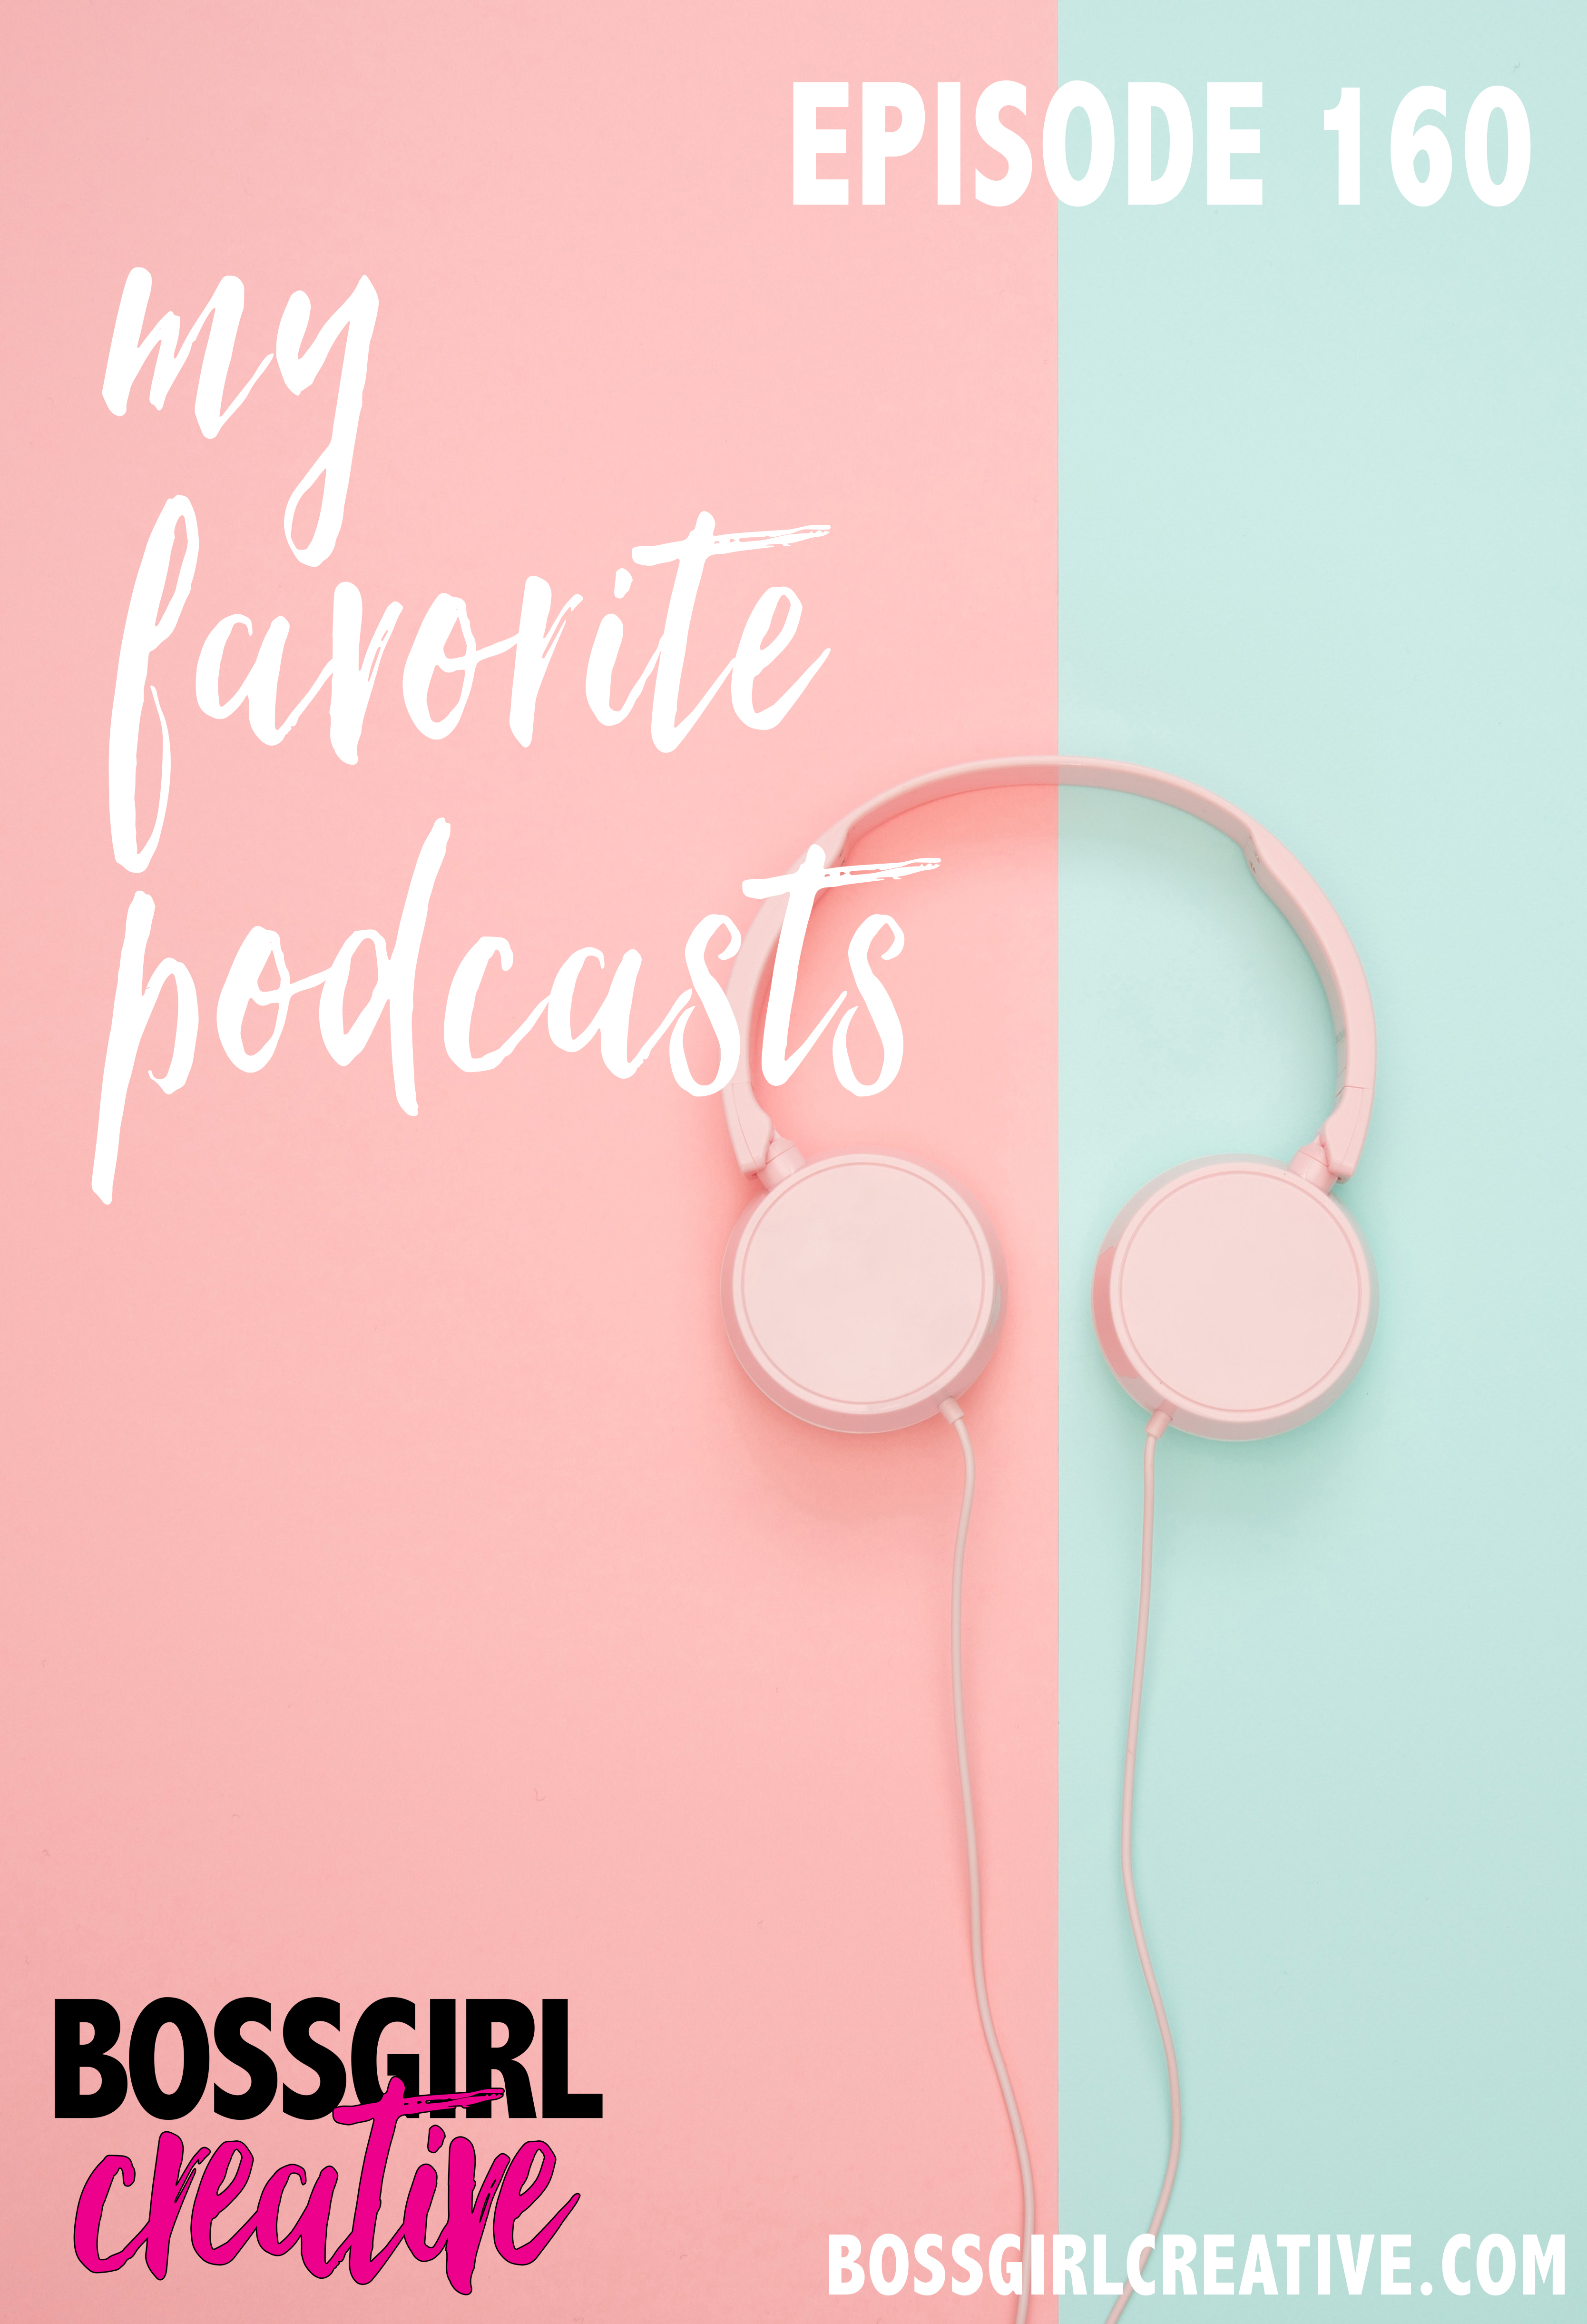 Looking for a new podcast (or 2 or 3) to listen to? Take a listen to Episode 160 which is all about my favorite podcasts!